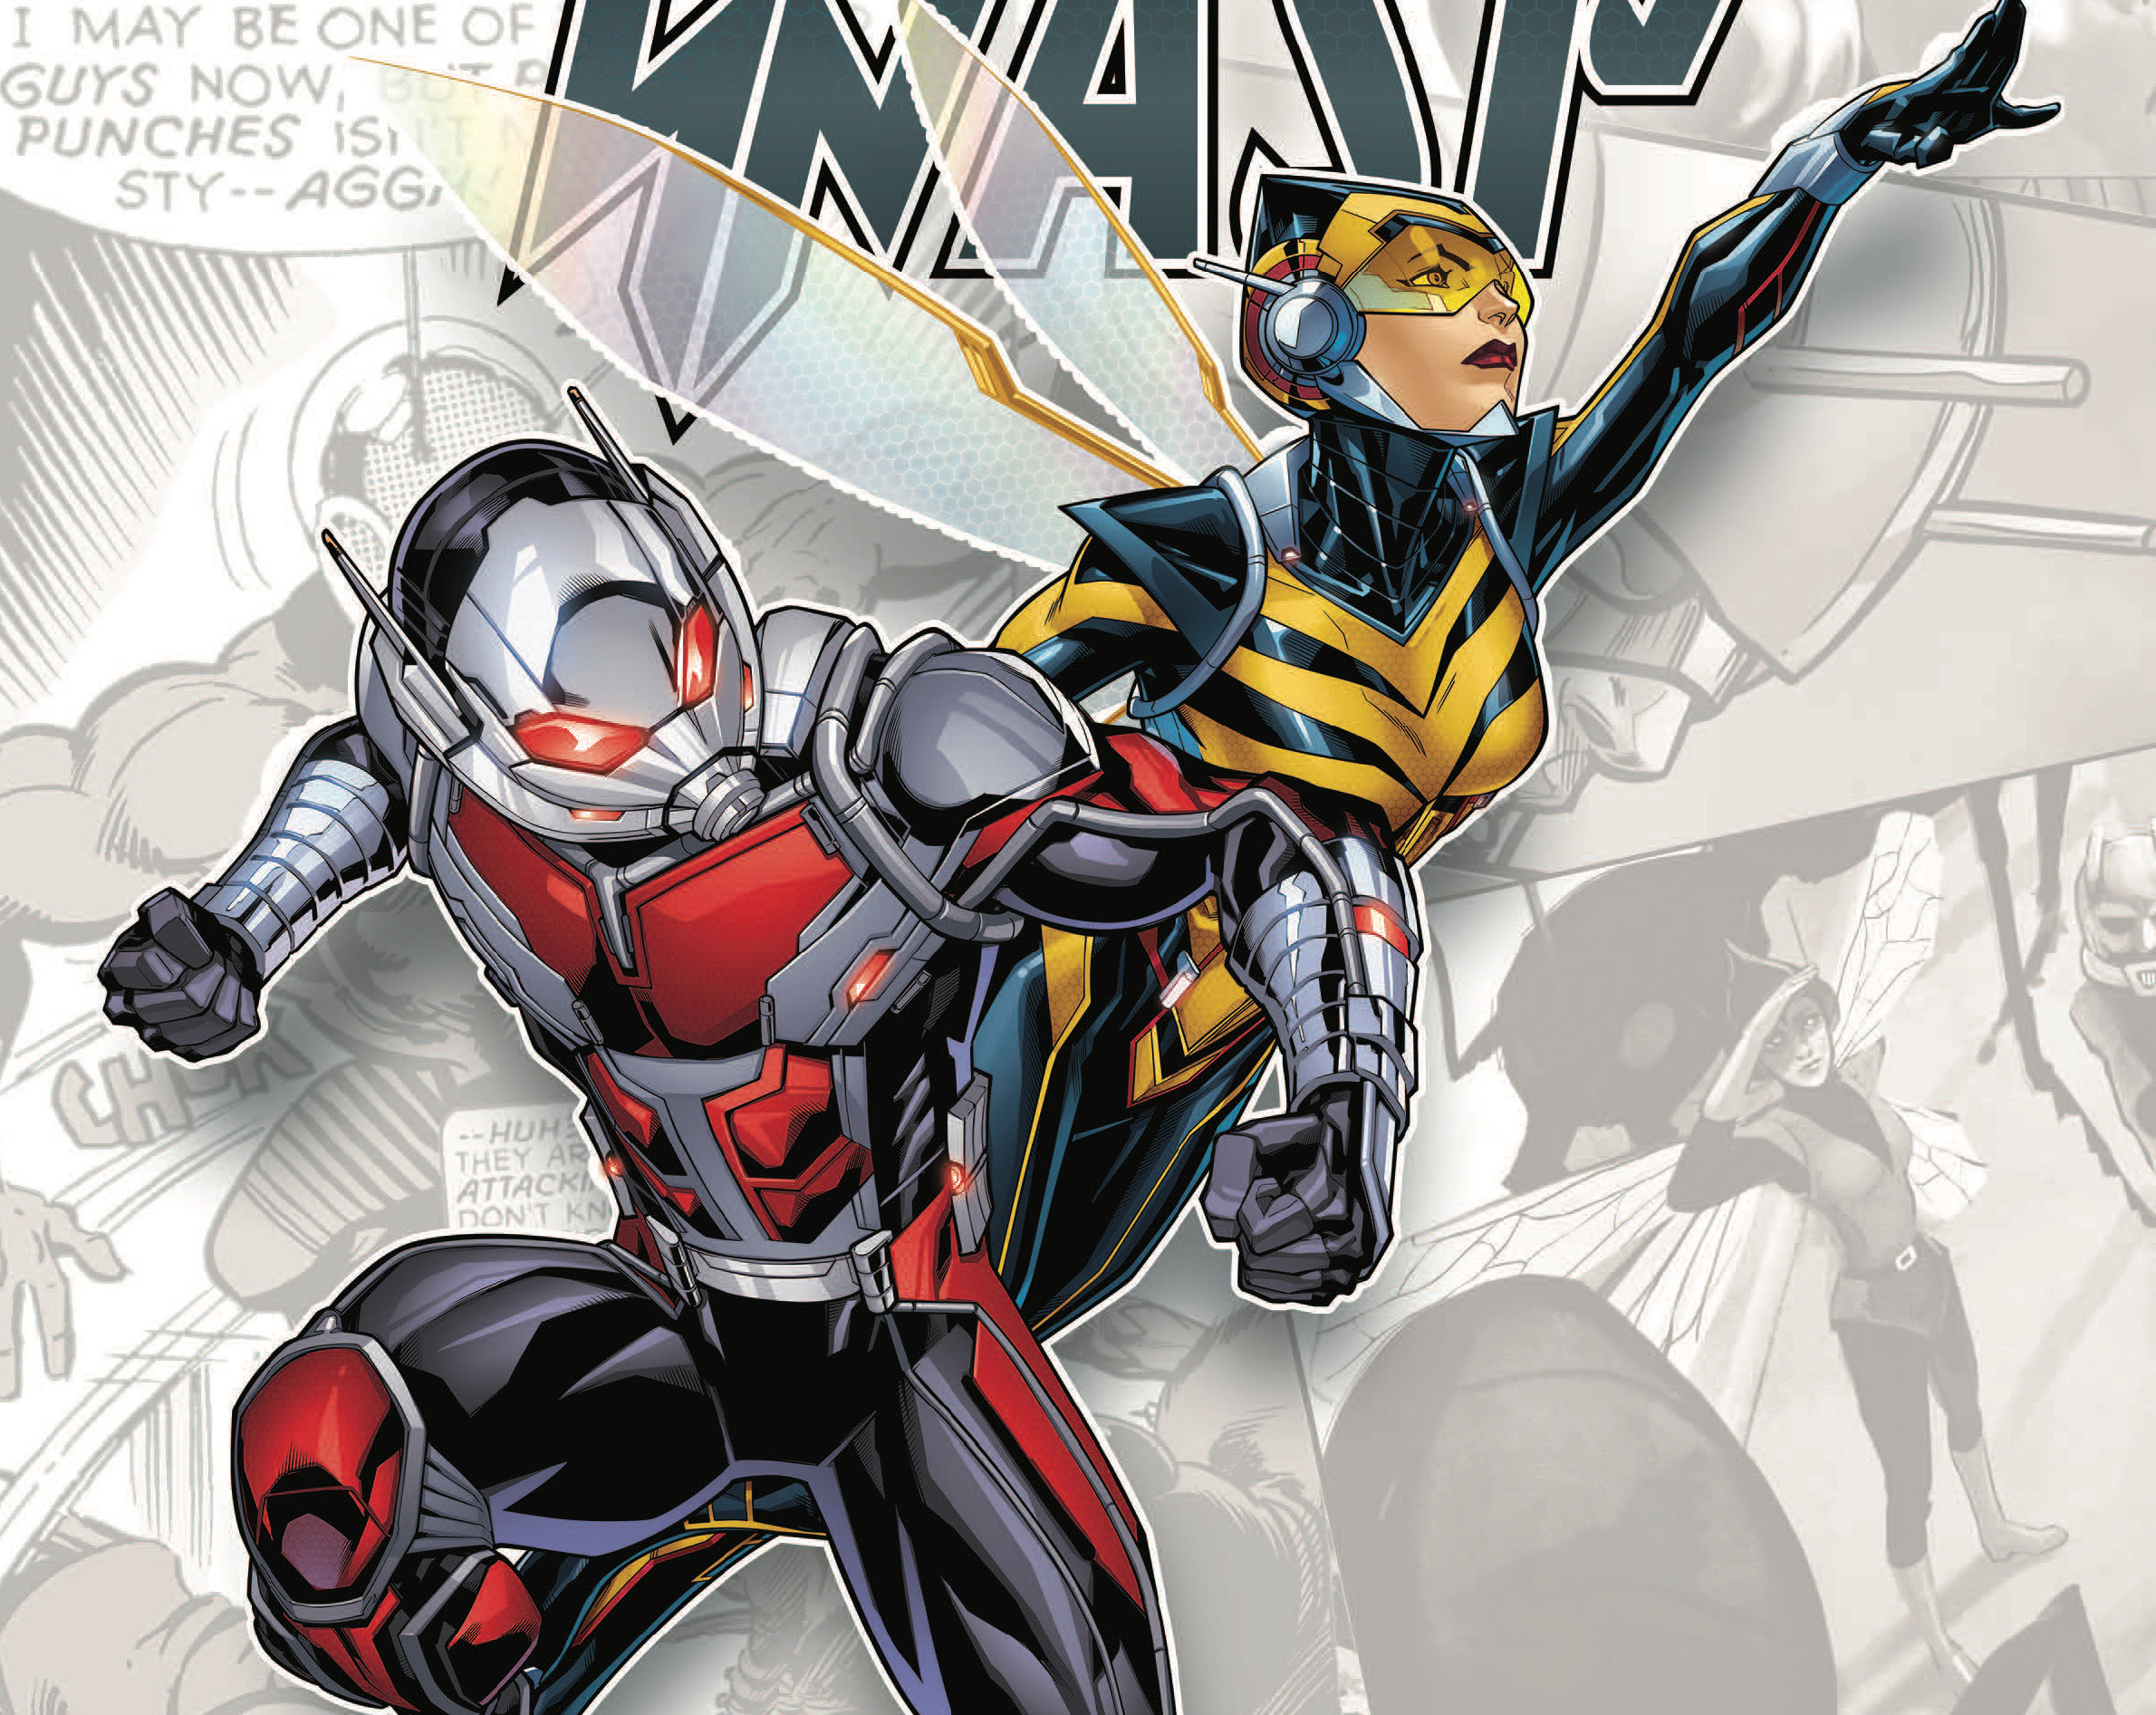 Marvel-Verse: Ant-Man & The Wasp